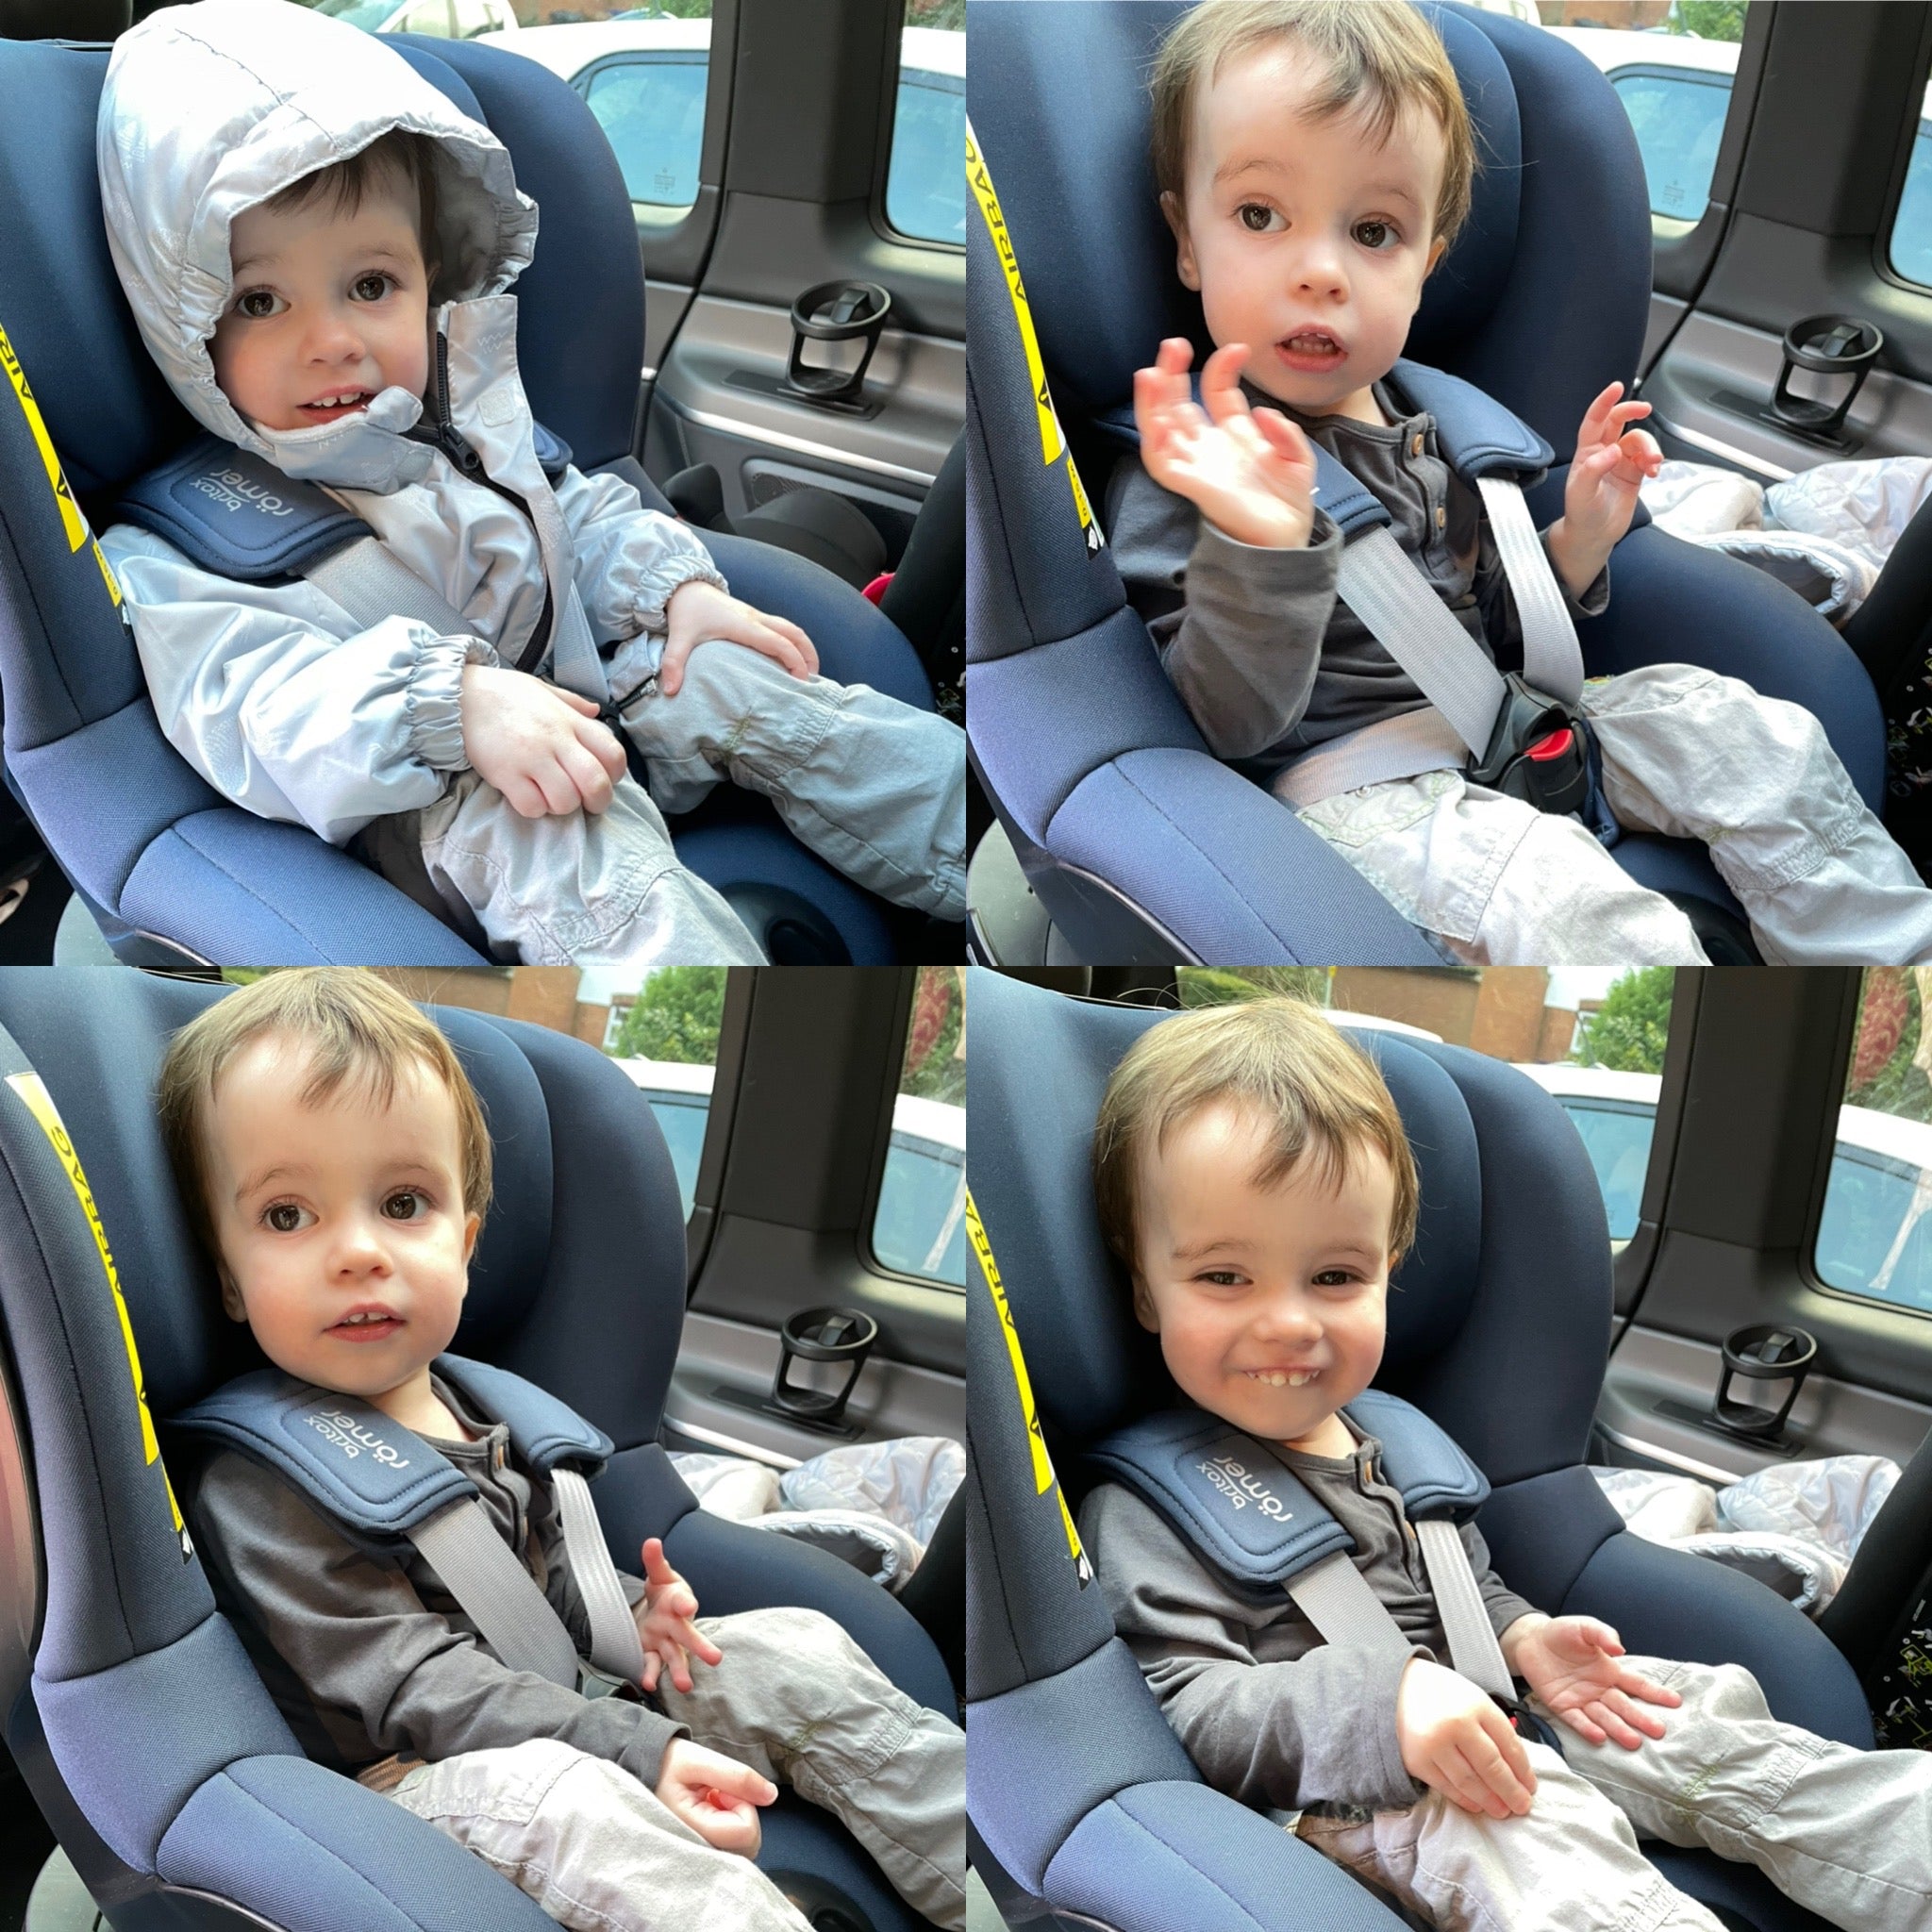 Why winter coats and car seats don’t mix